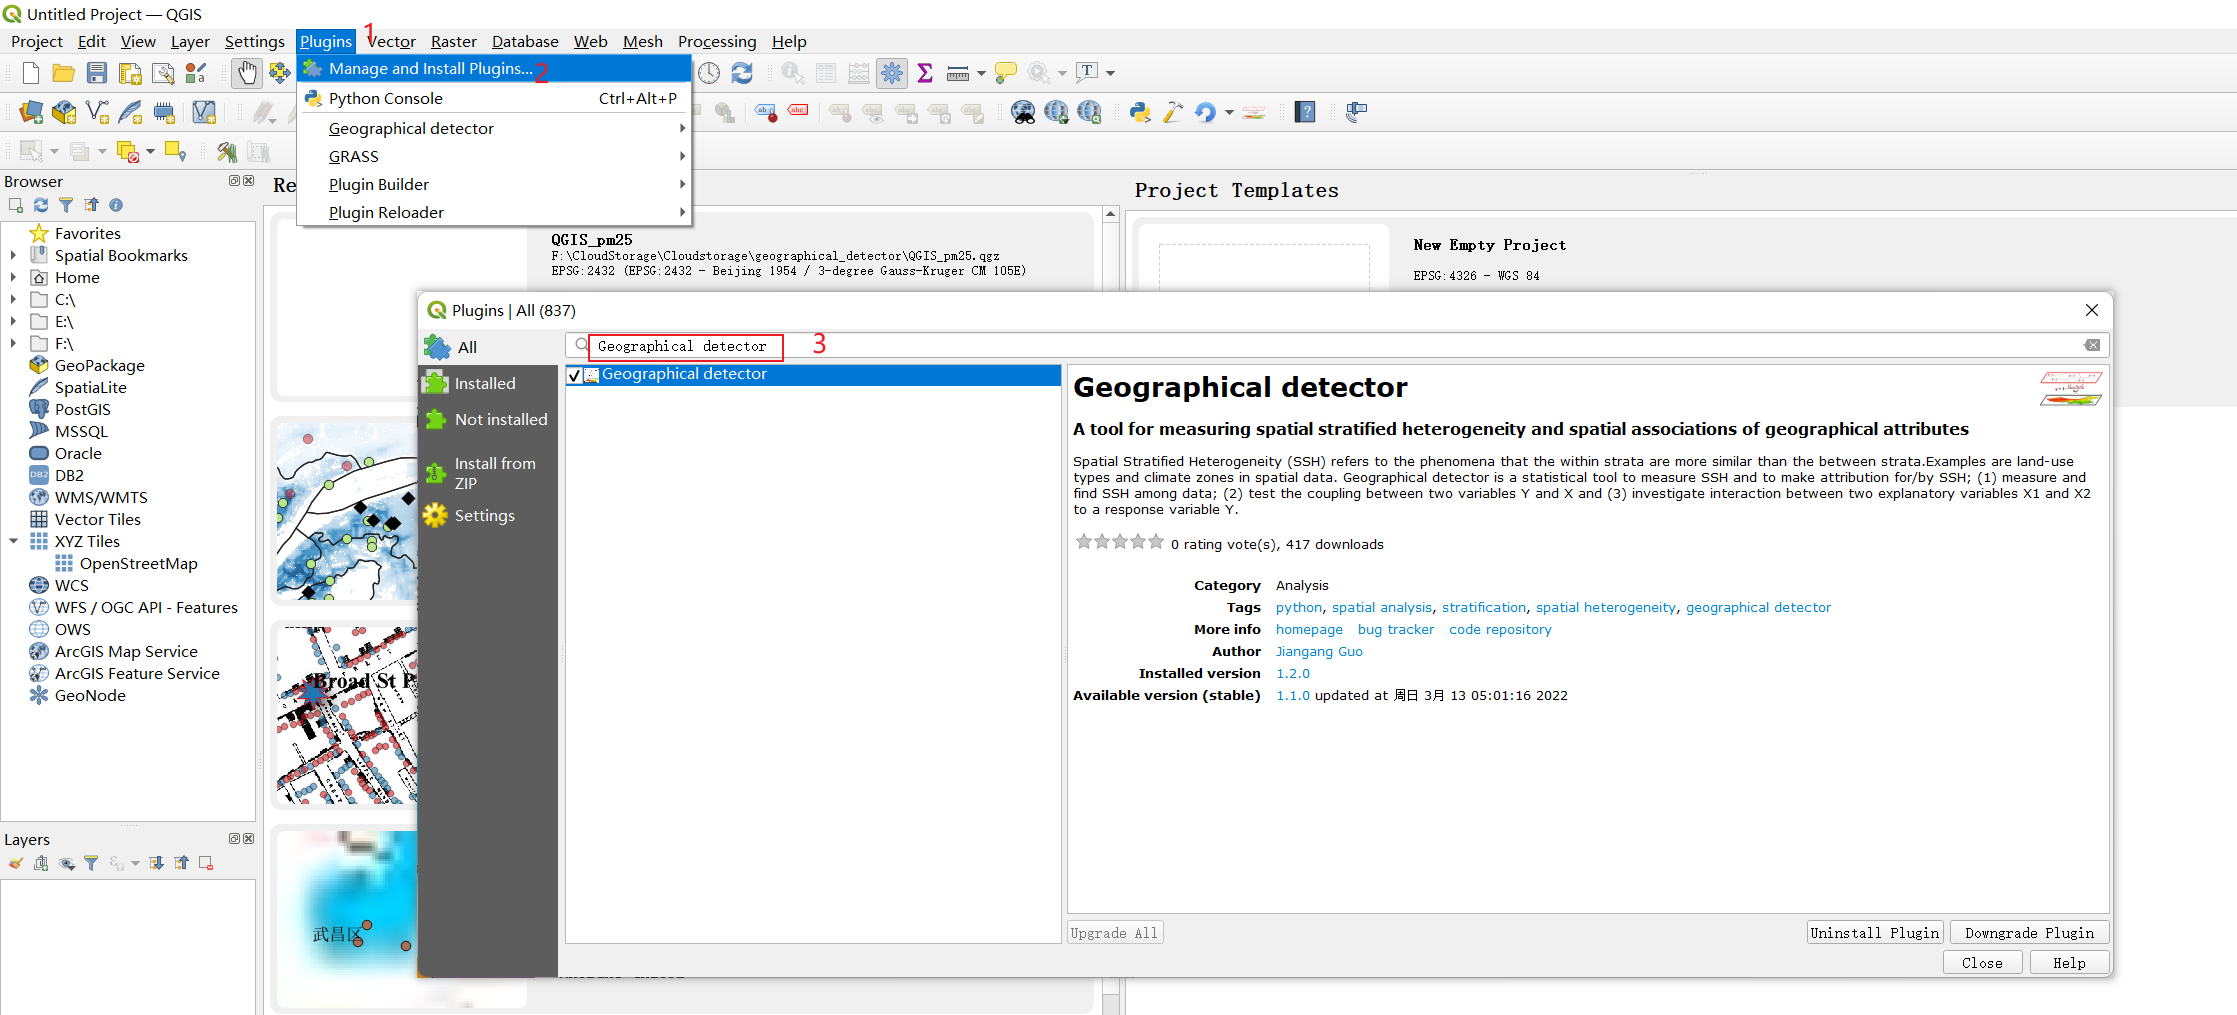 Menus and procedure for one-time activation of the Geographical detector plugin within QGIS